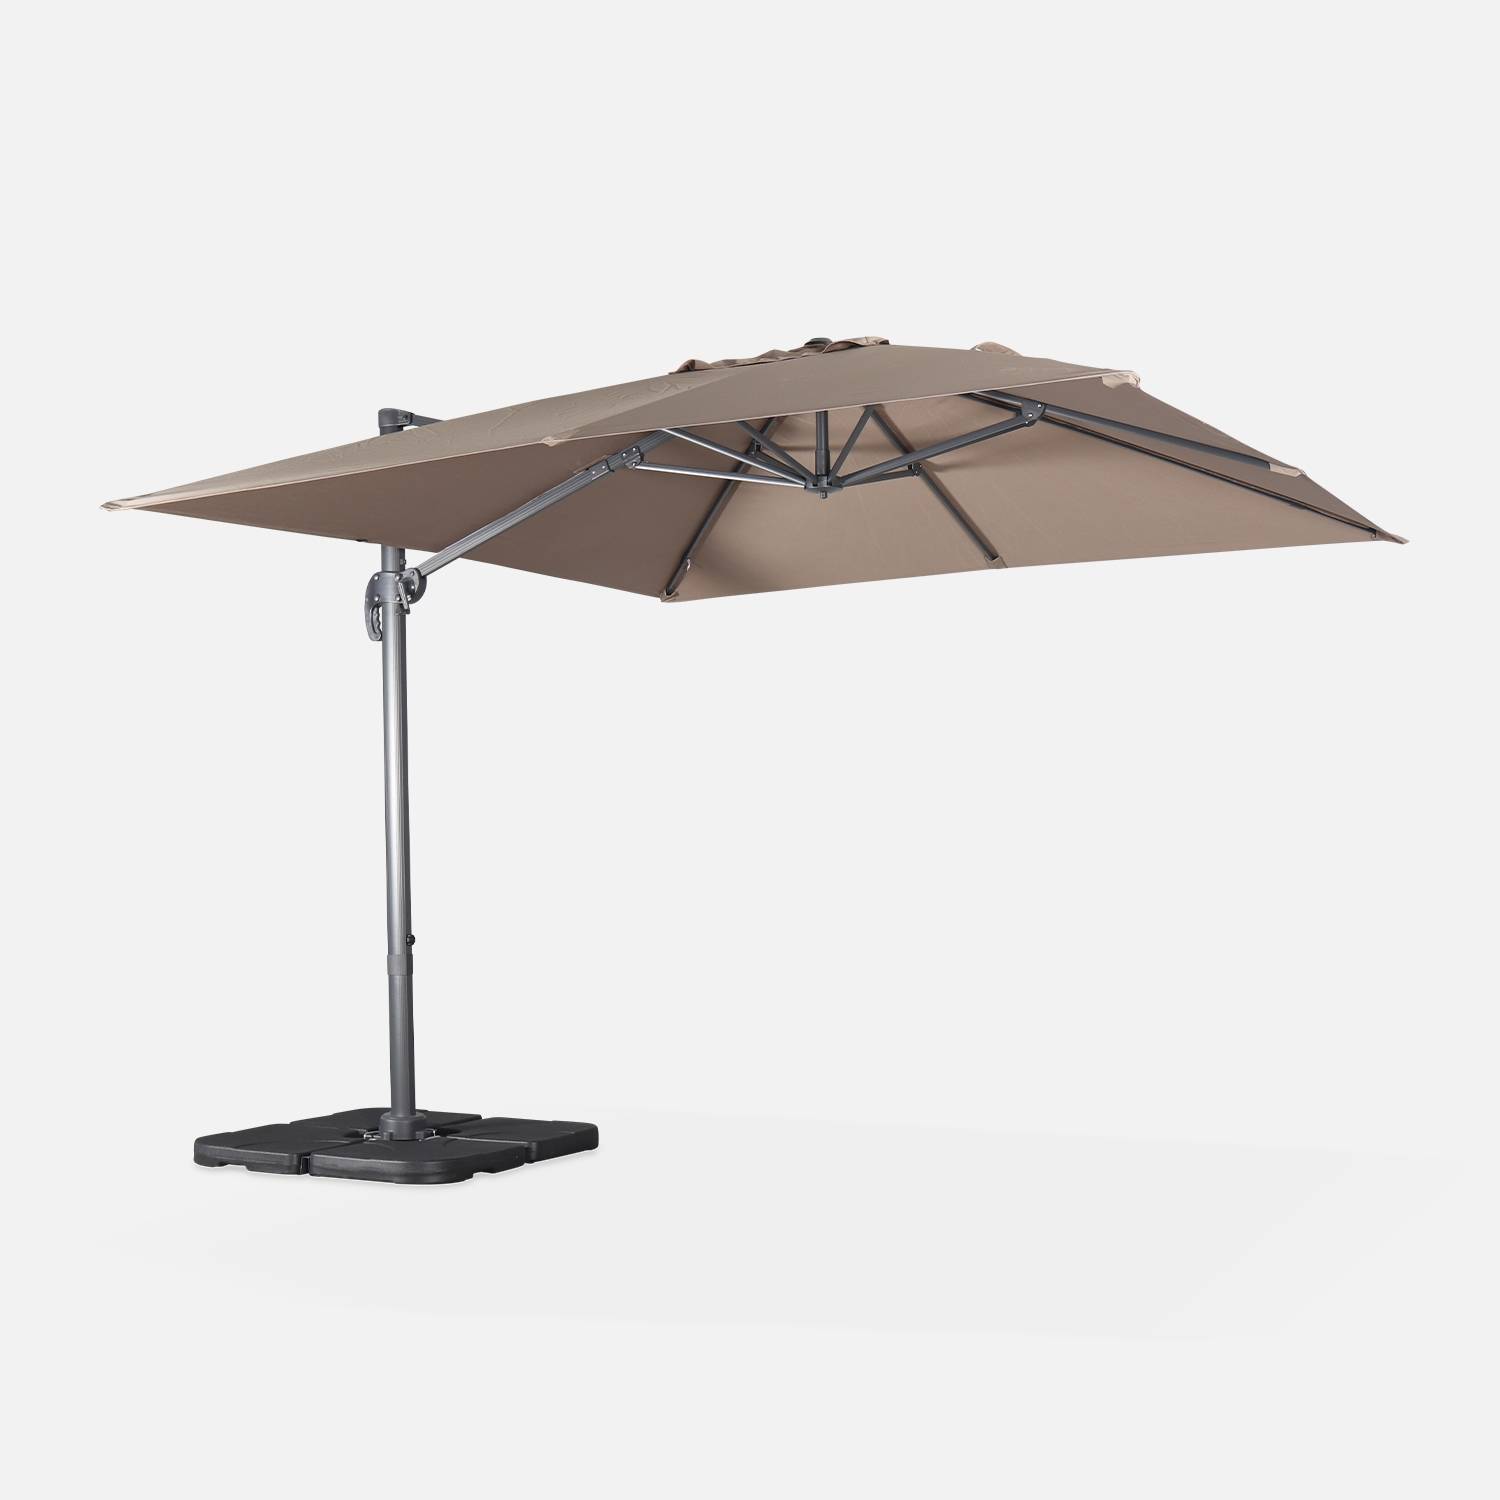 Parasol taupe 3x3m structure grise + 4 dalles I sweeek 